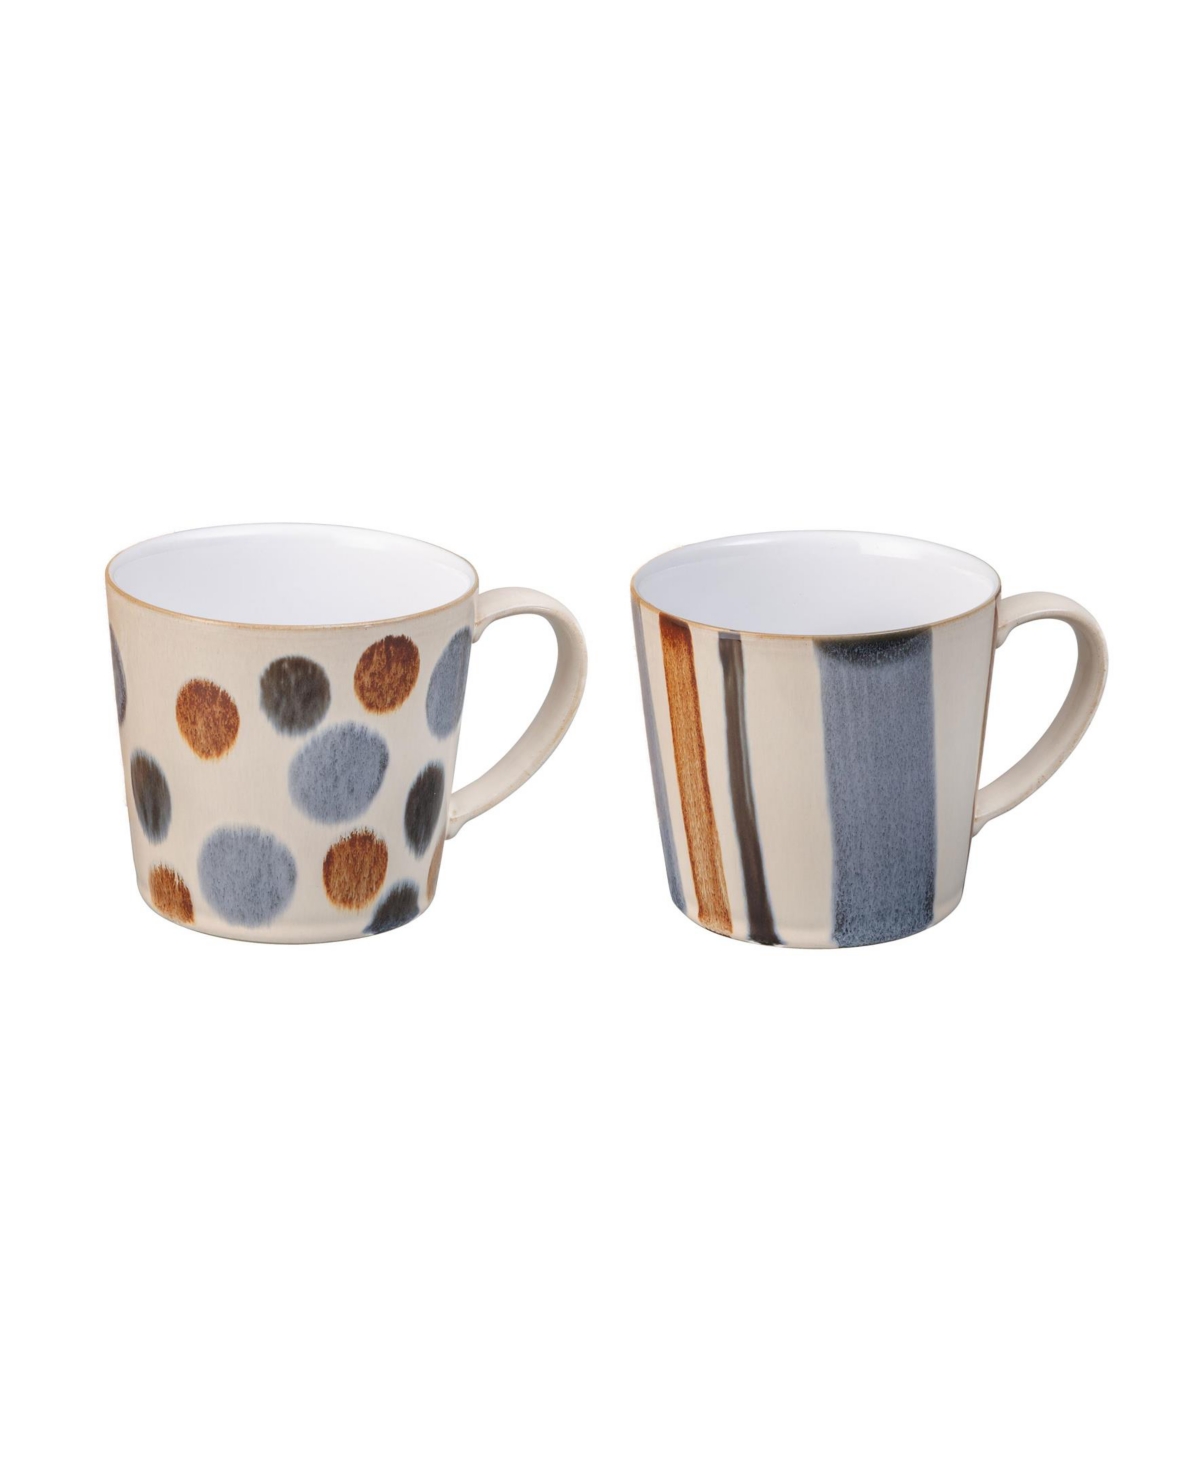 Brown Multi Set of 2 Mugs - Multi Colored And Hand Painted